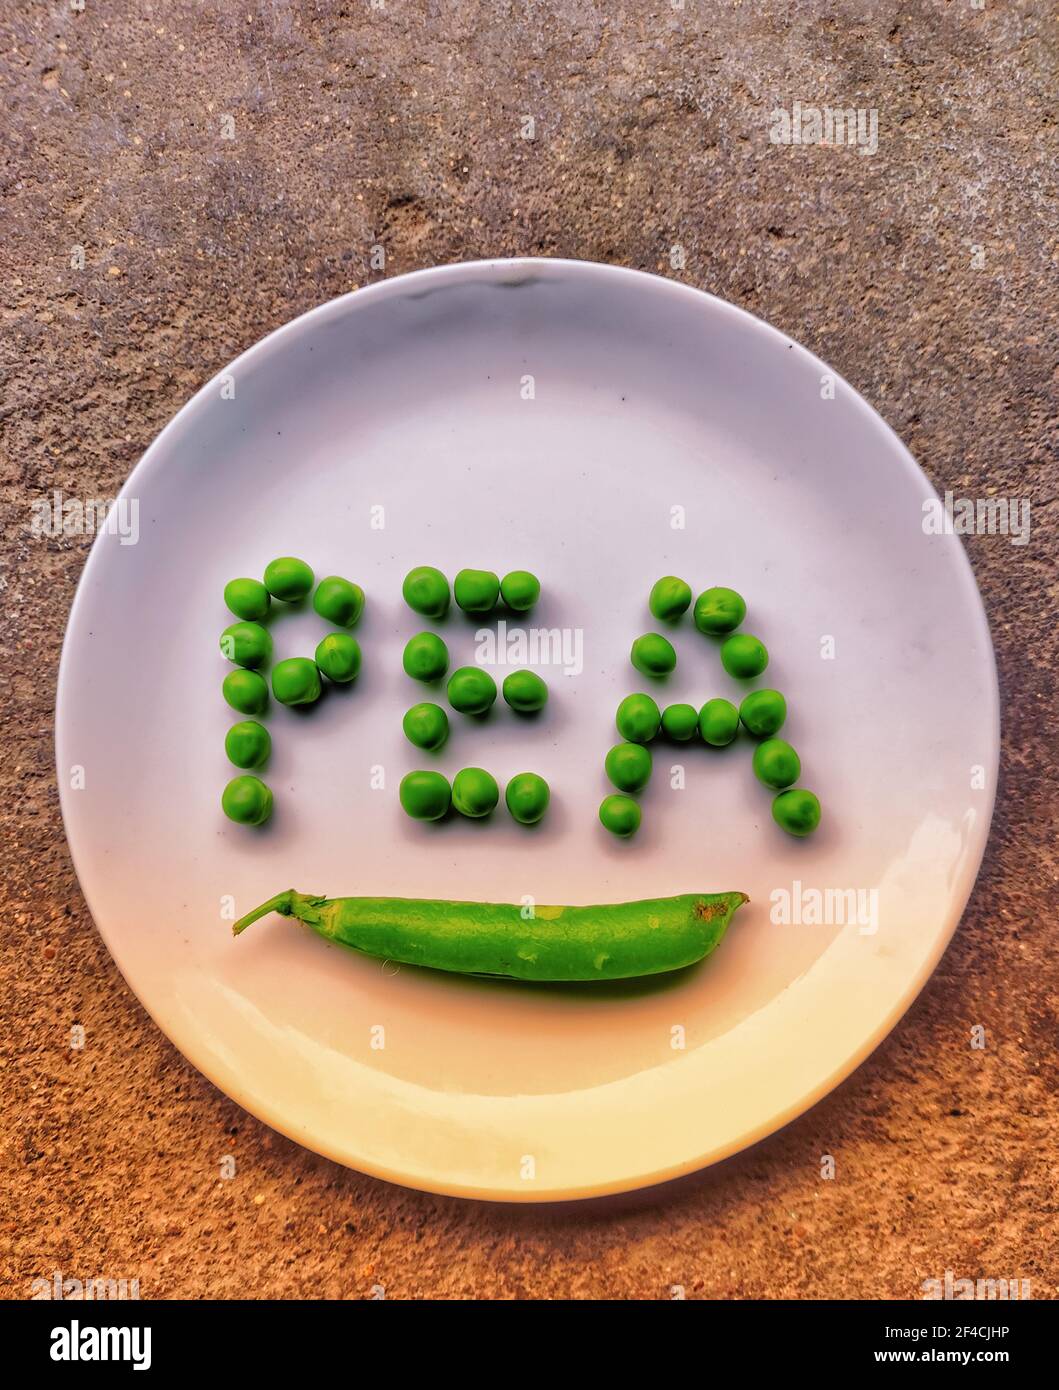 An image of fresh green peas on a plate with text pea beautiful text made with grains of pea Stock Photo